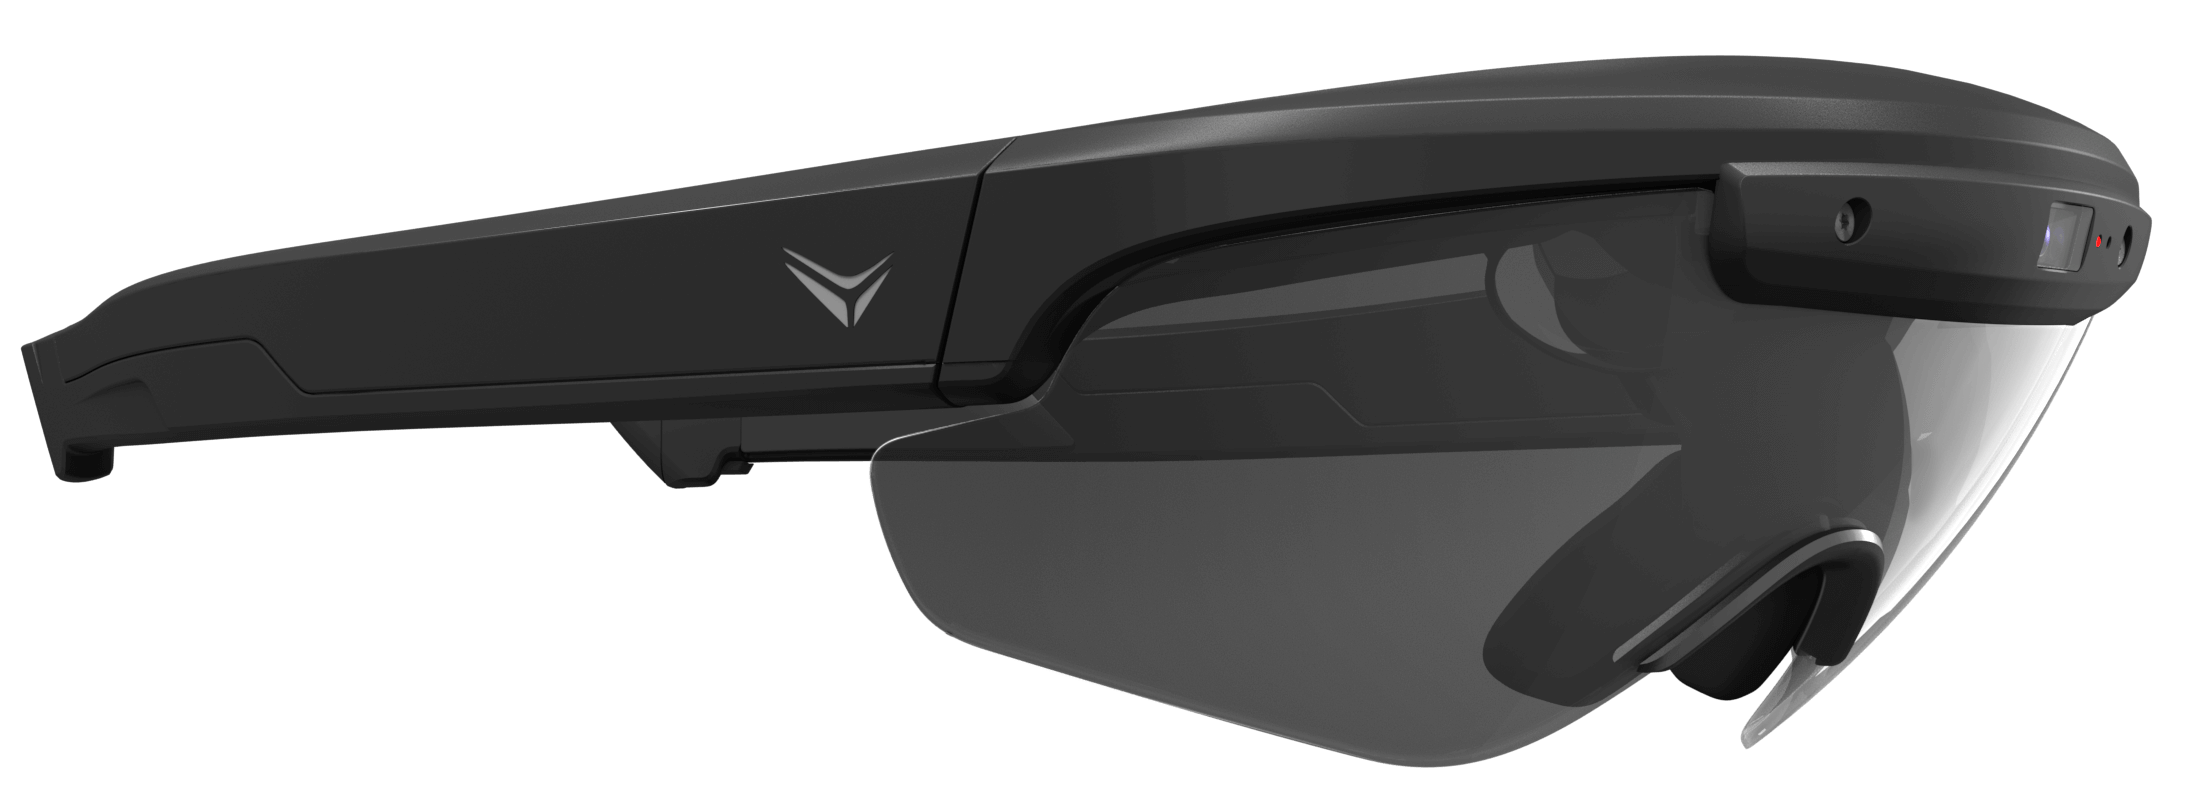 Raptor AR Biking Glasses: Clarity and Data On The Road